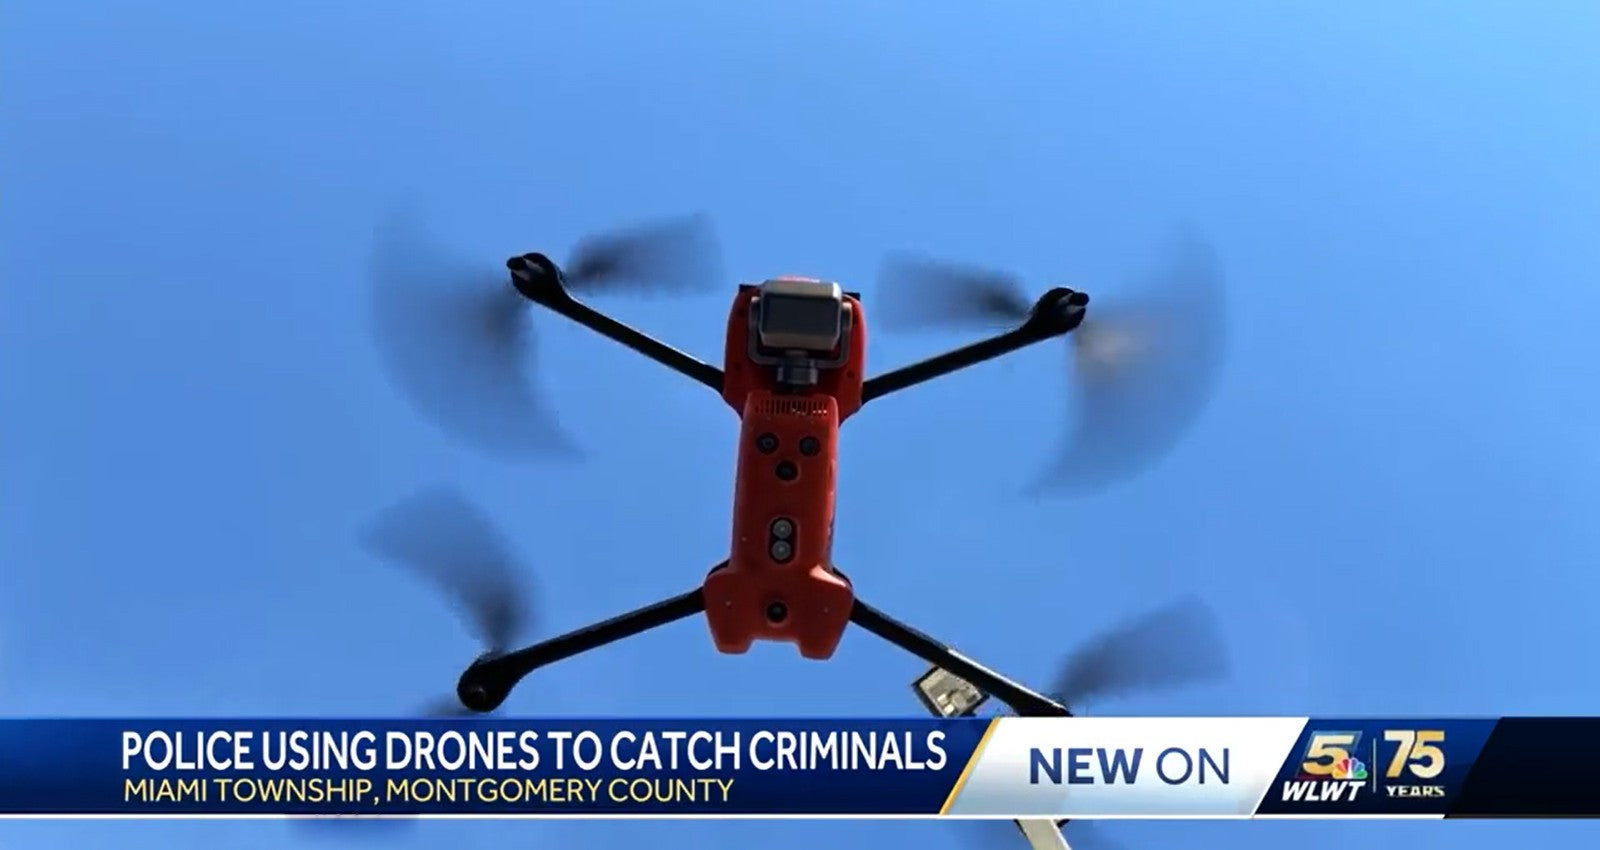 Police Drones Catch Criminals for Miami Valley Police Department